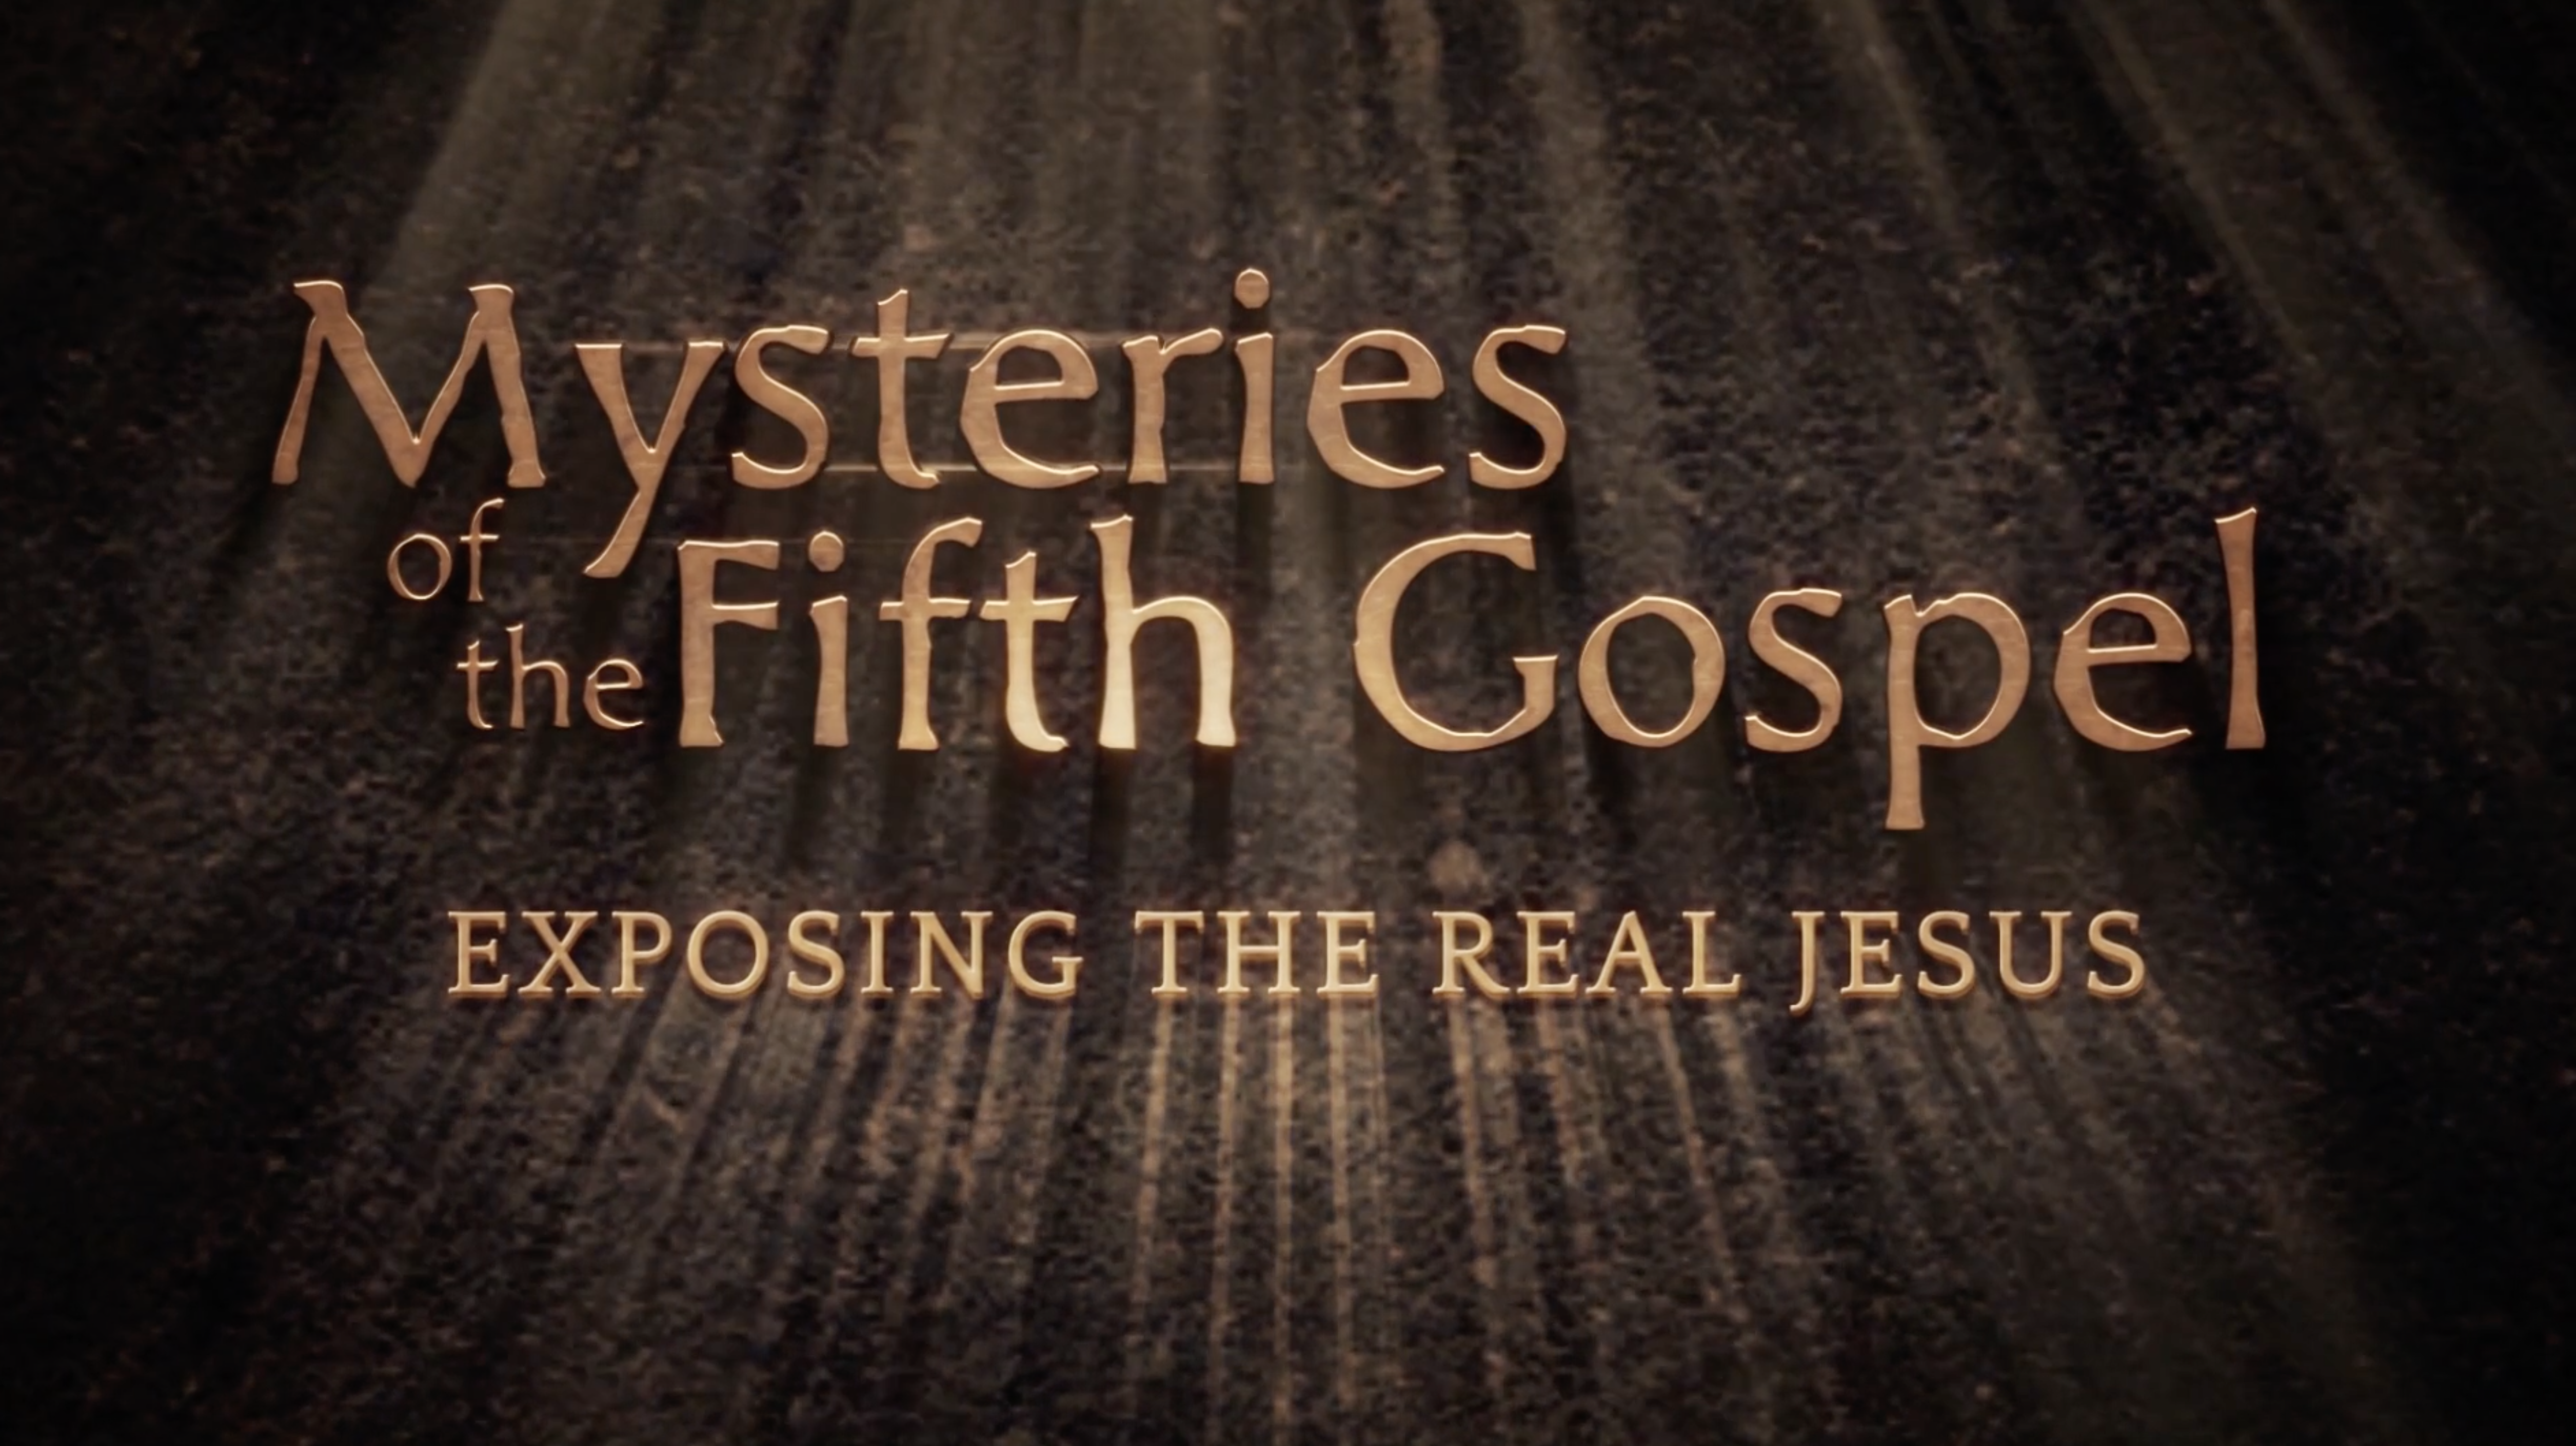 Mysteries of the Fifth Gospel